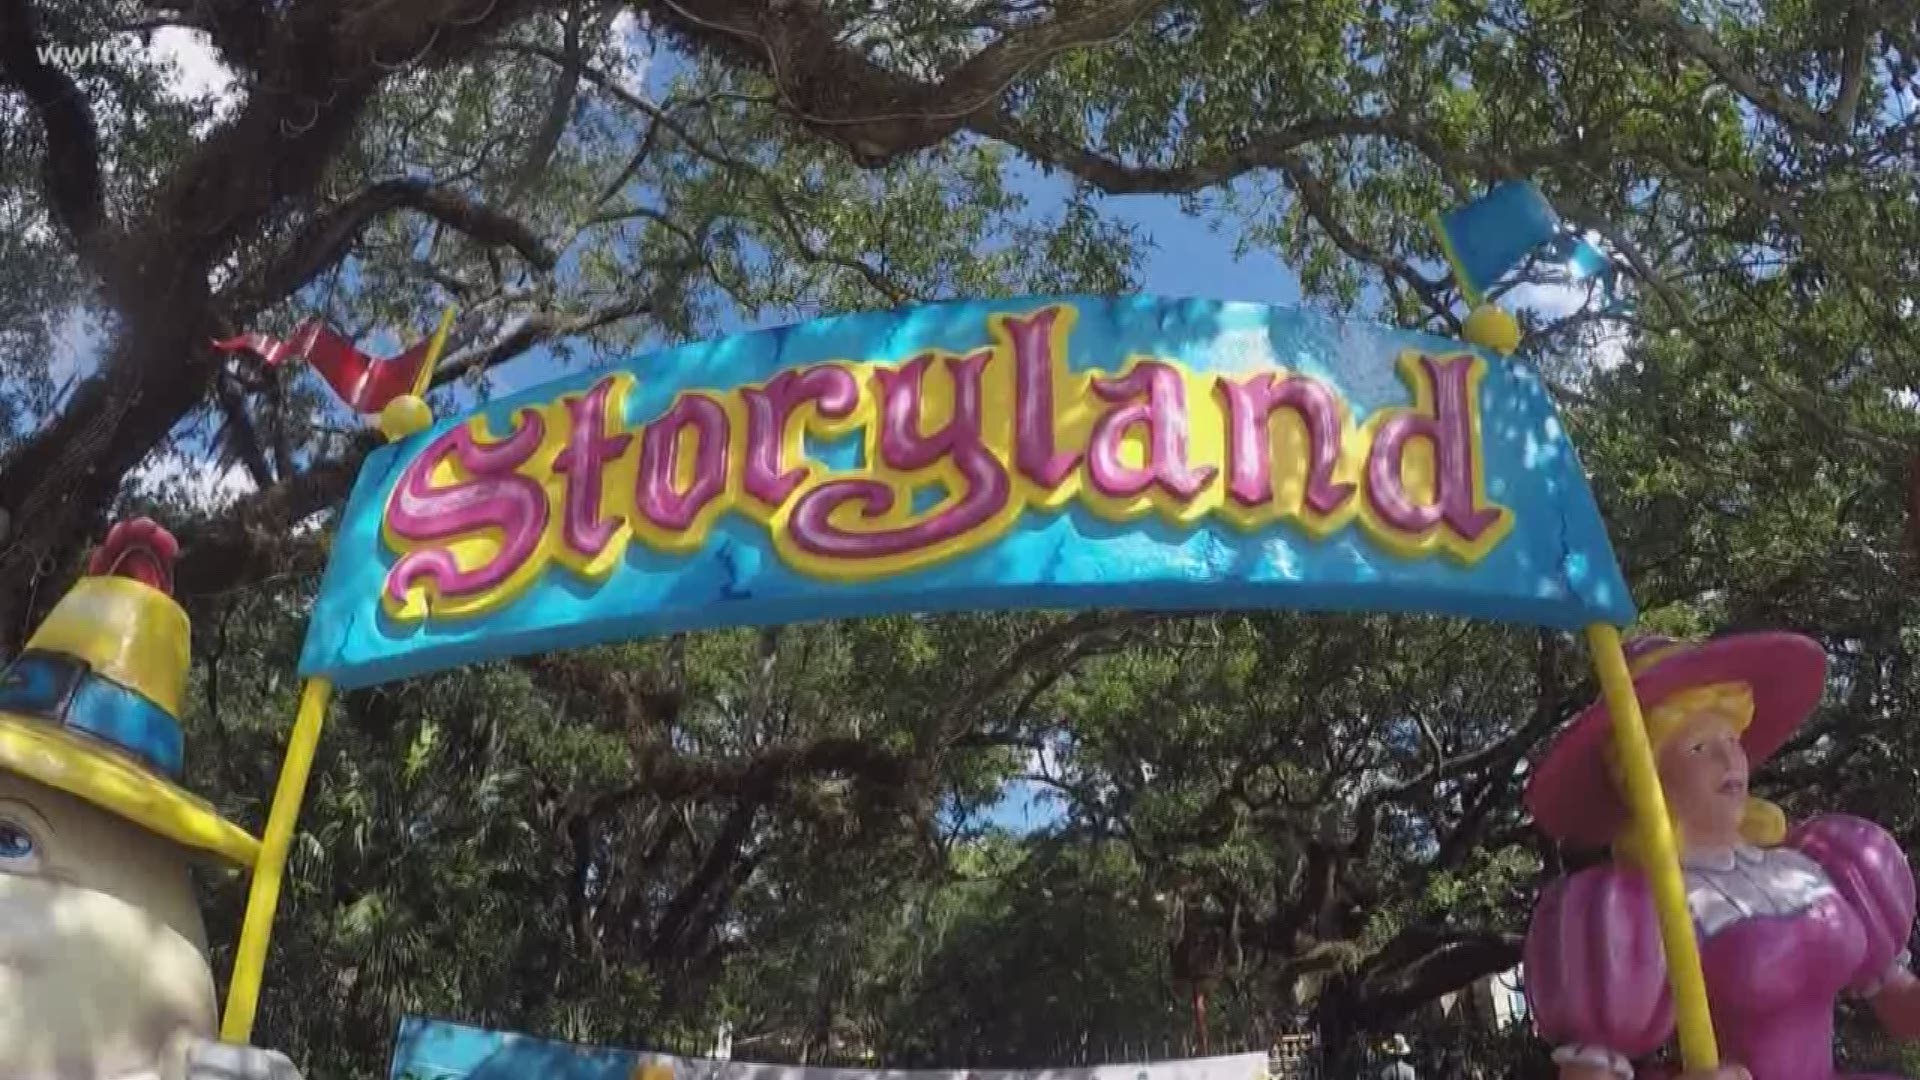 Storyland is back open - with new upgrades